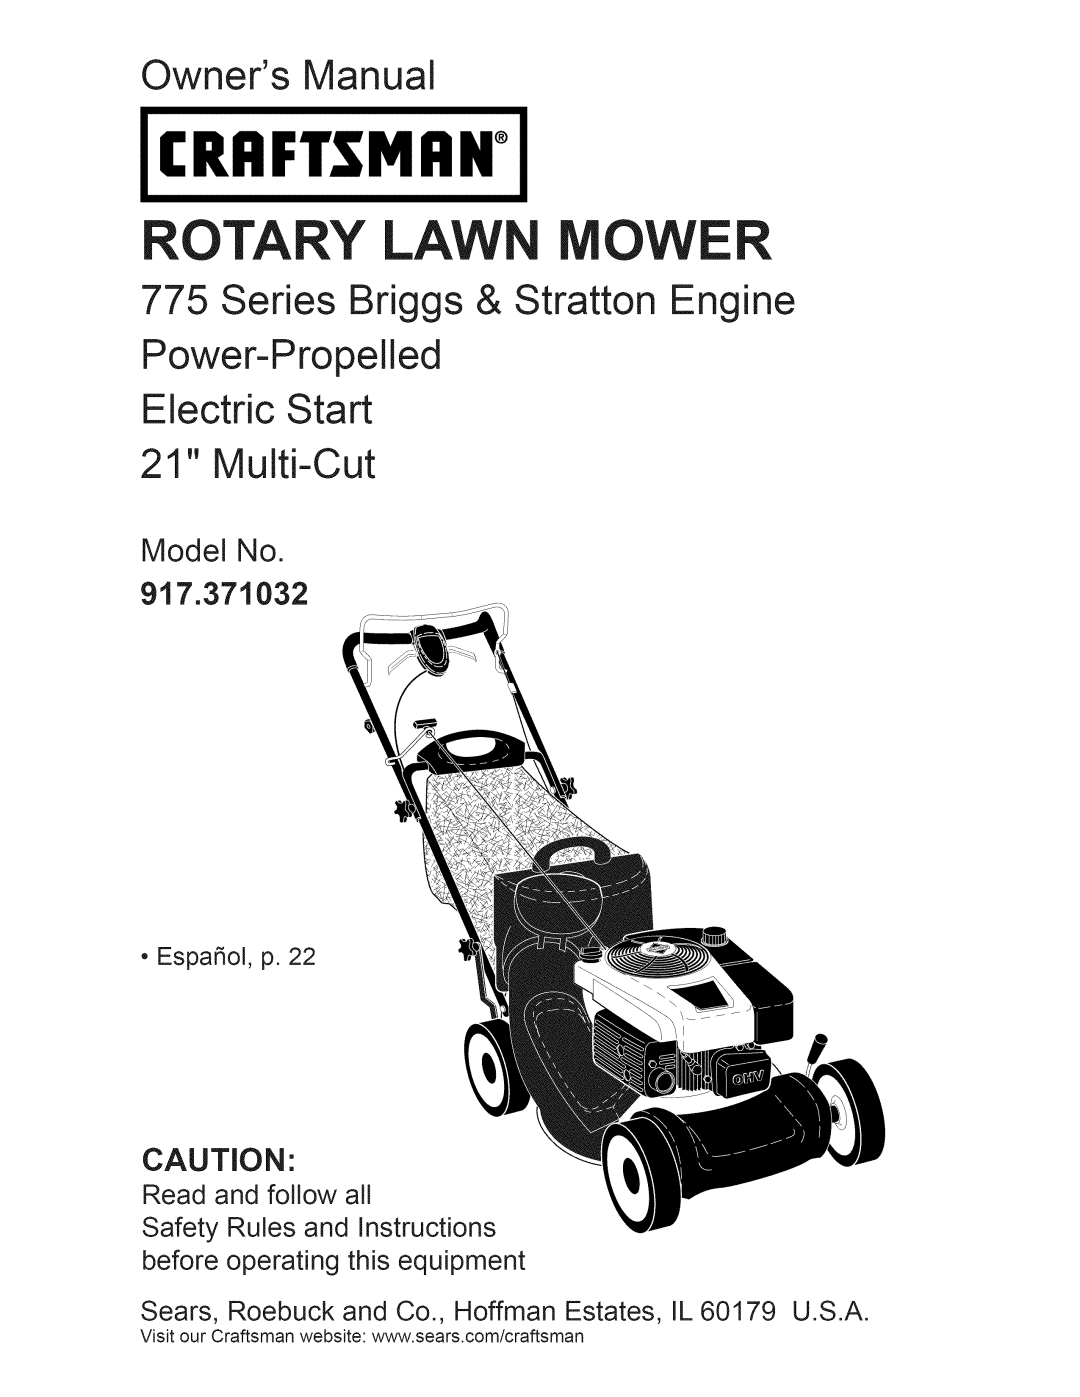 Craftsman 917.371032 owner manual Craftsman, Rotary Lawn Mower, Owners Manual, Series Briggs & Stratton Engine 